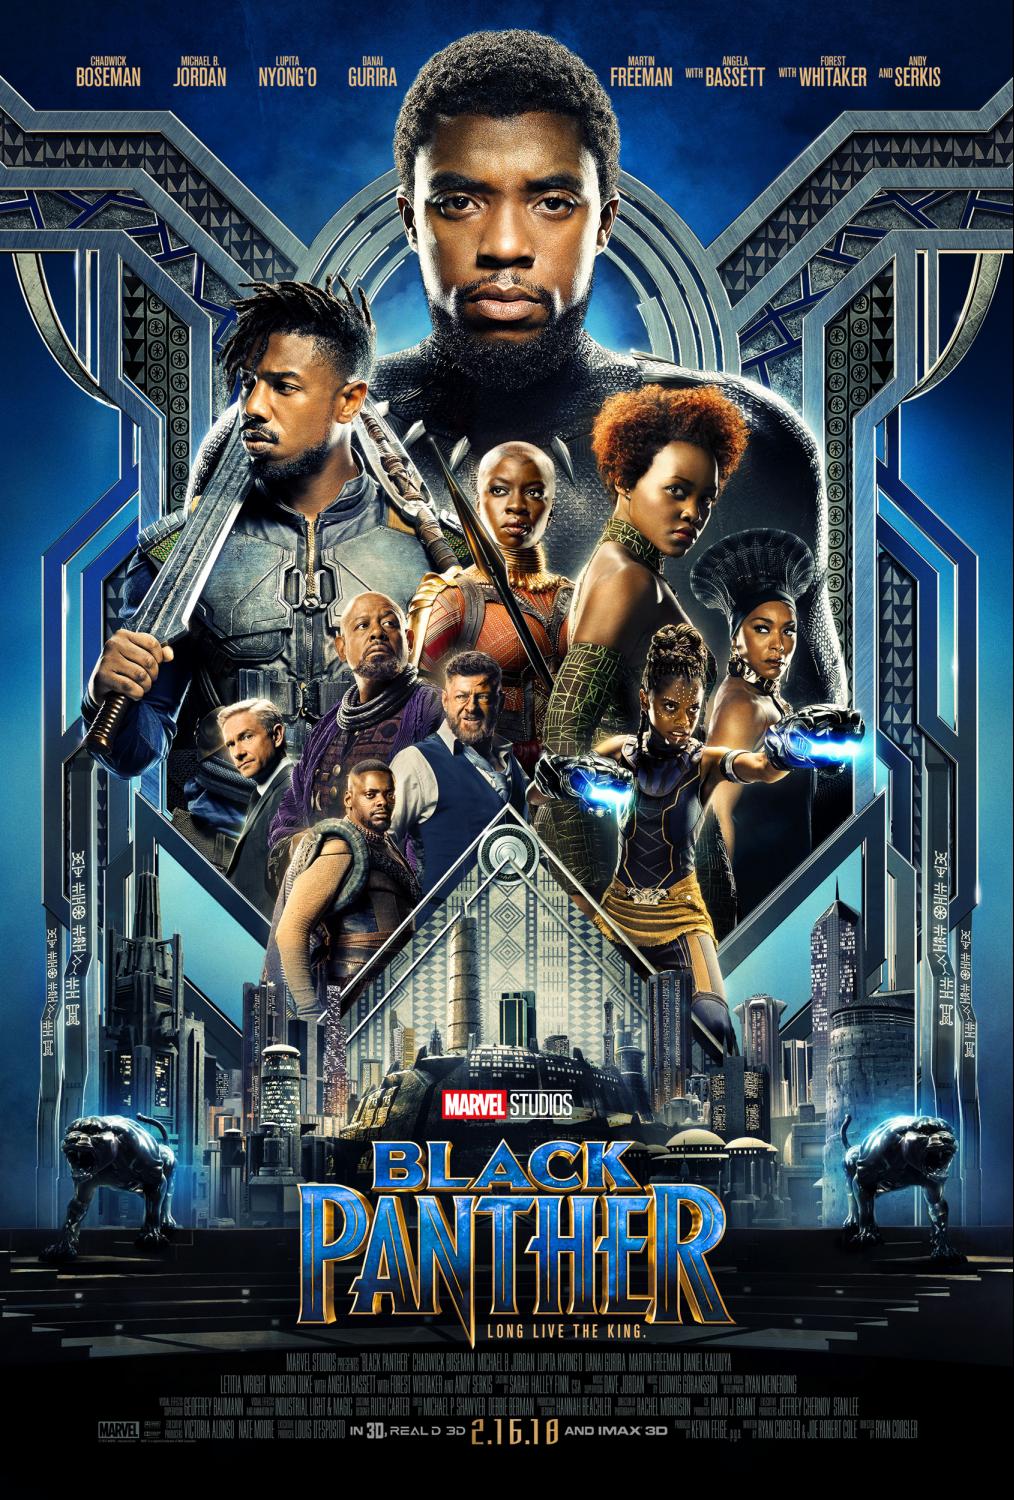 BlackPanther poster